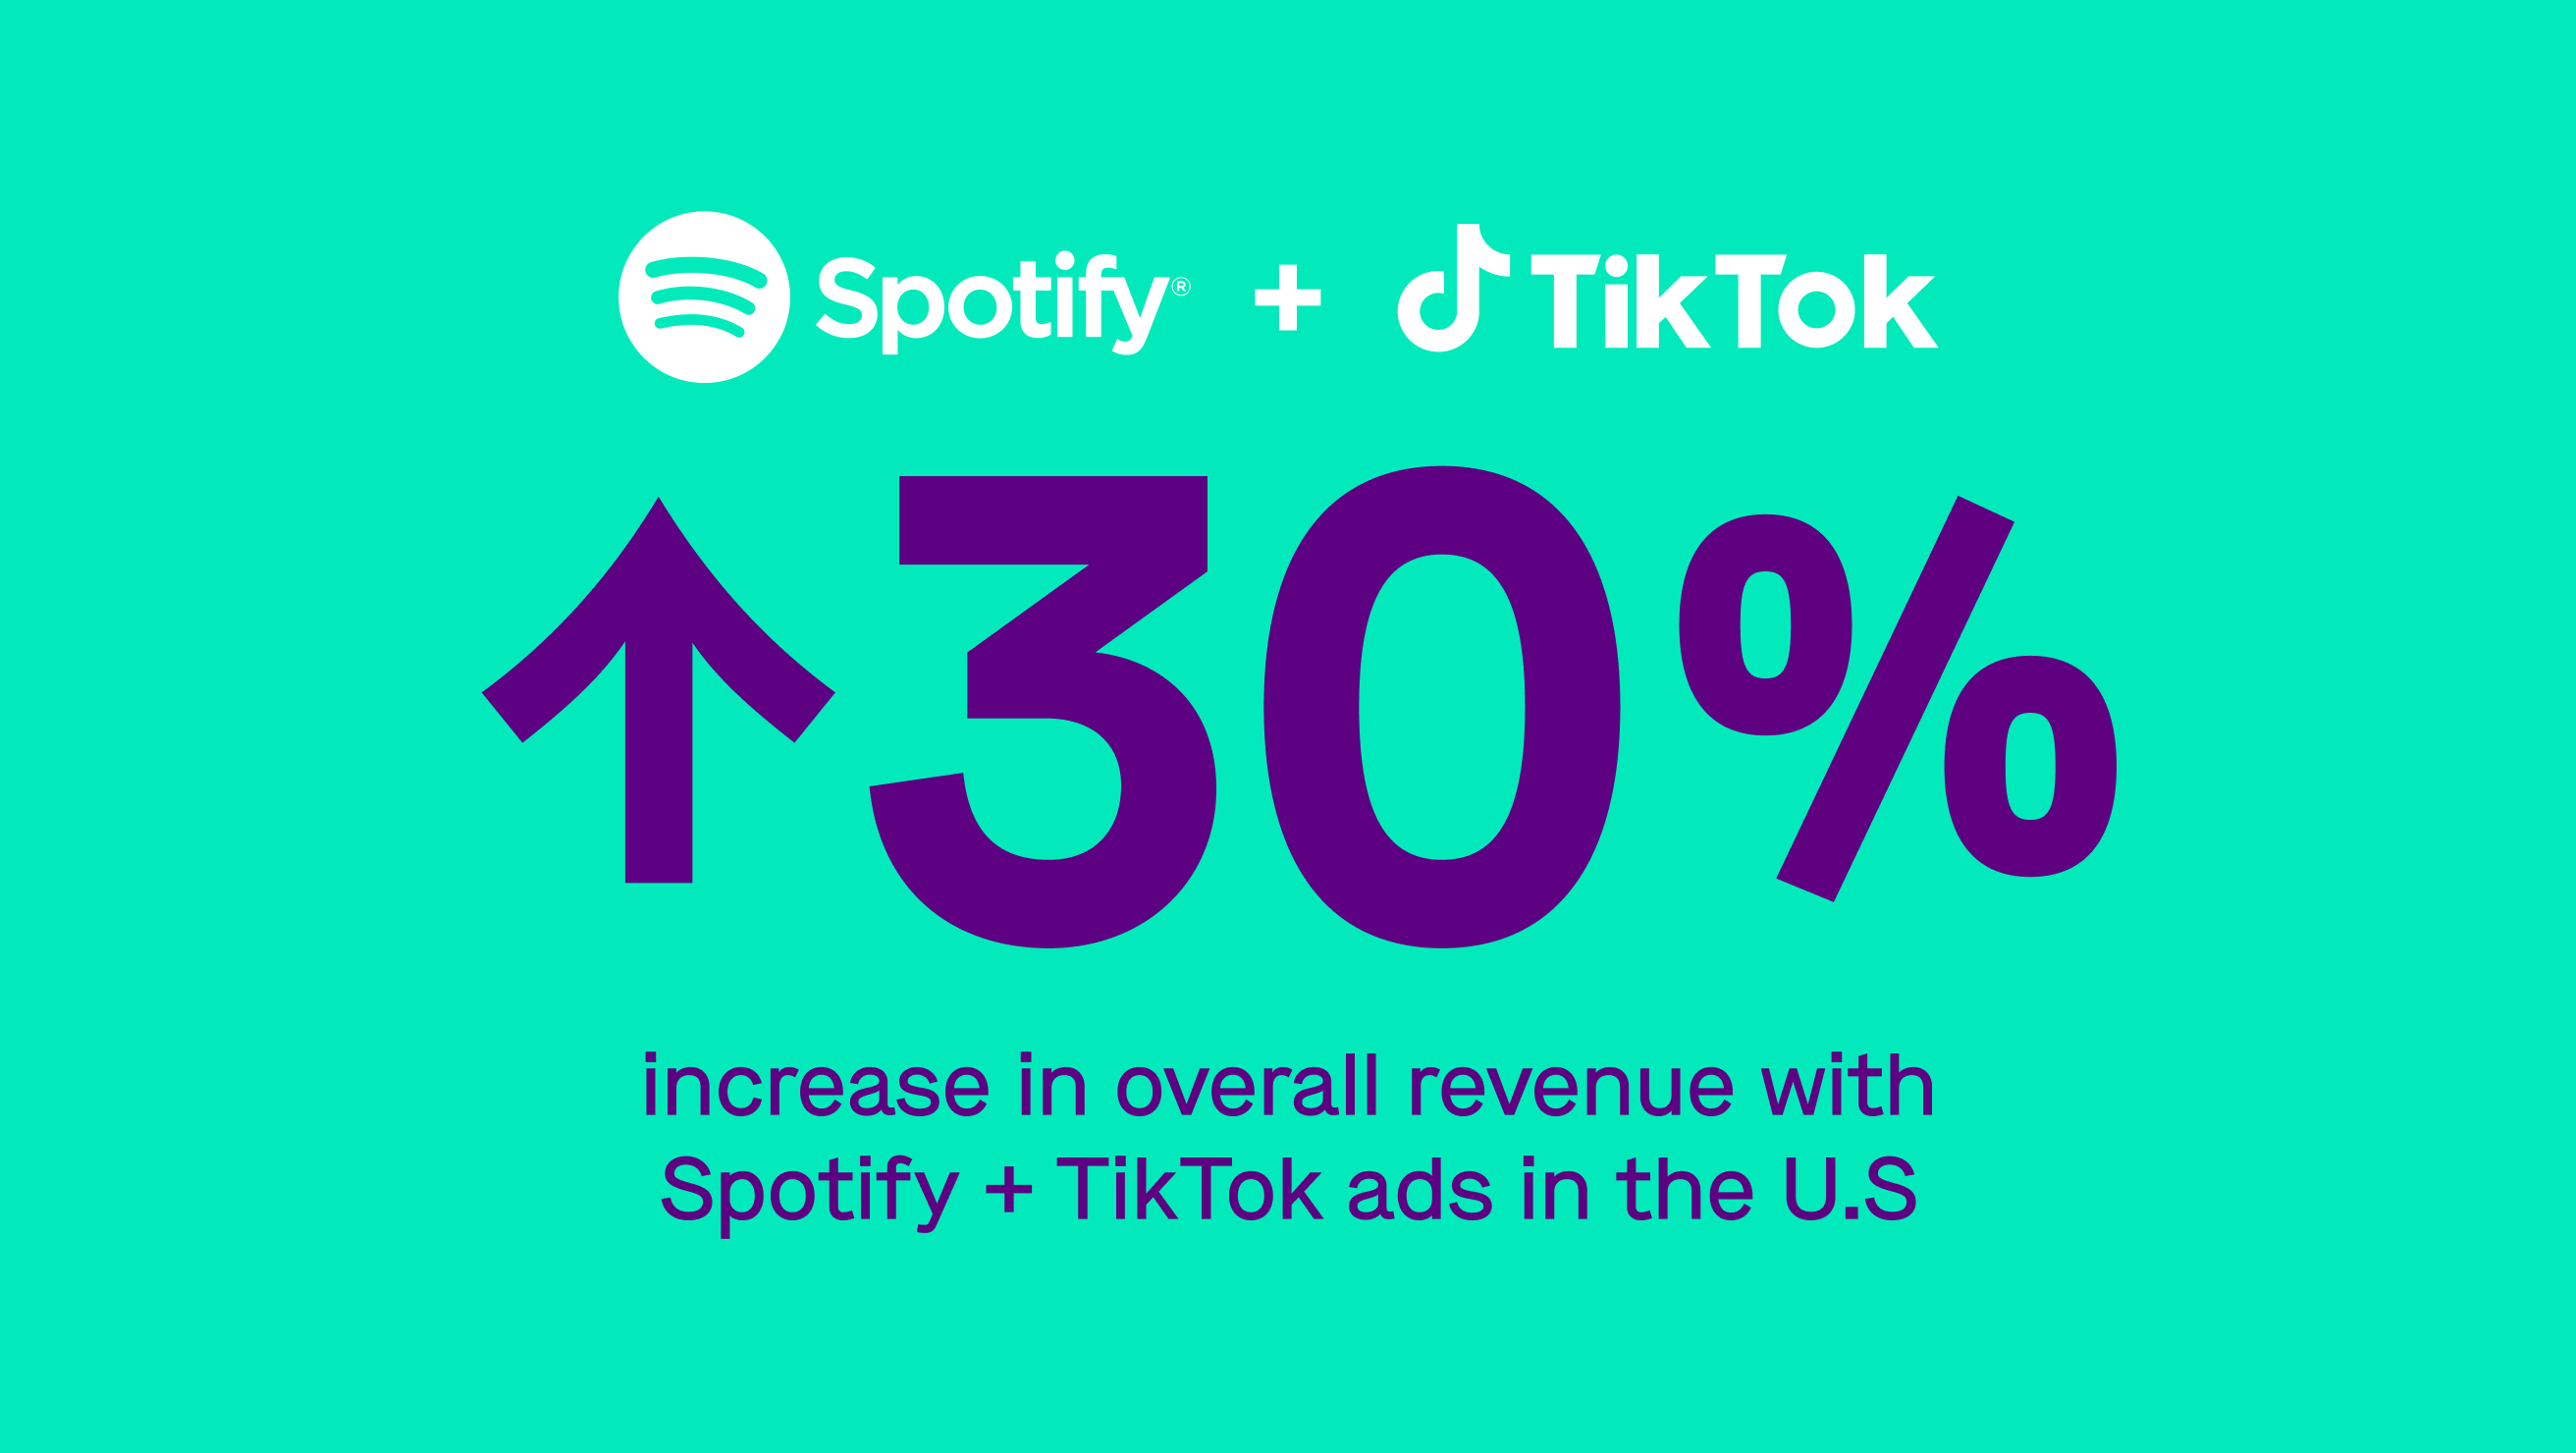 Graphic with a turquoise background displaying logos of Spotify and TikTok, a 30% increase arrow, and text about a 30% rise in overall revenue with Spotify + TikTok ads in the U.S.